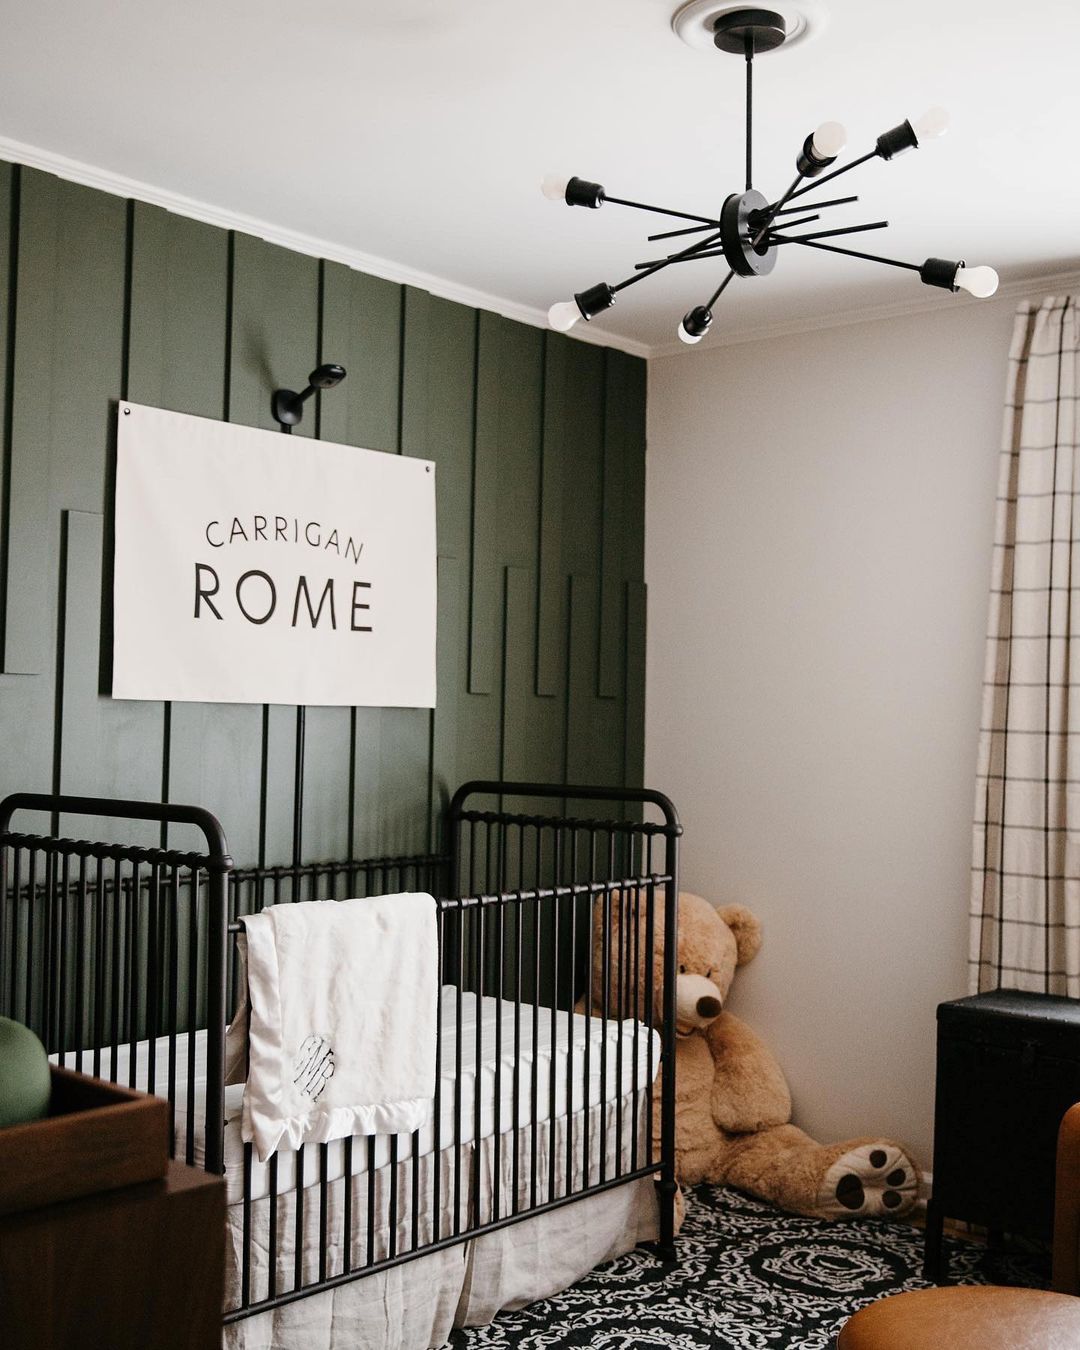 A green accent wall with name art in a baby nursery. Photo by Instagram user @houseofmartinhomes